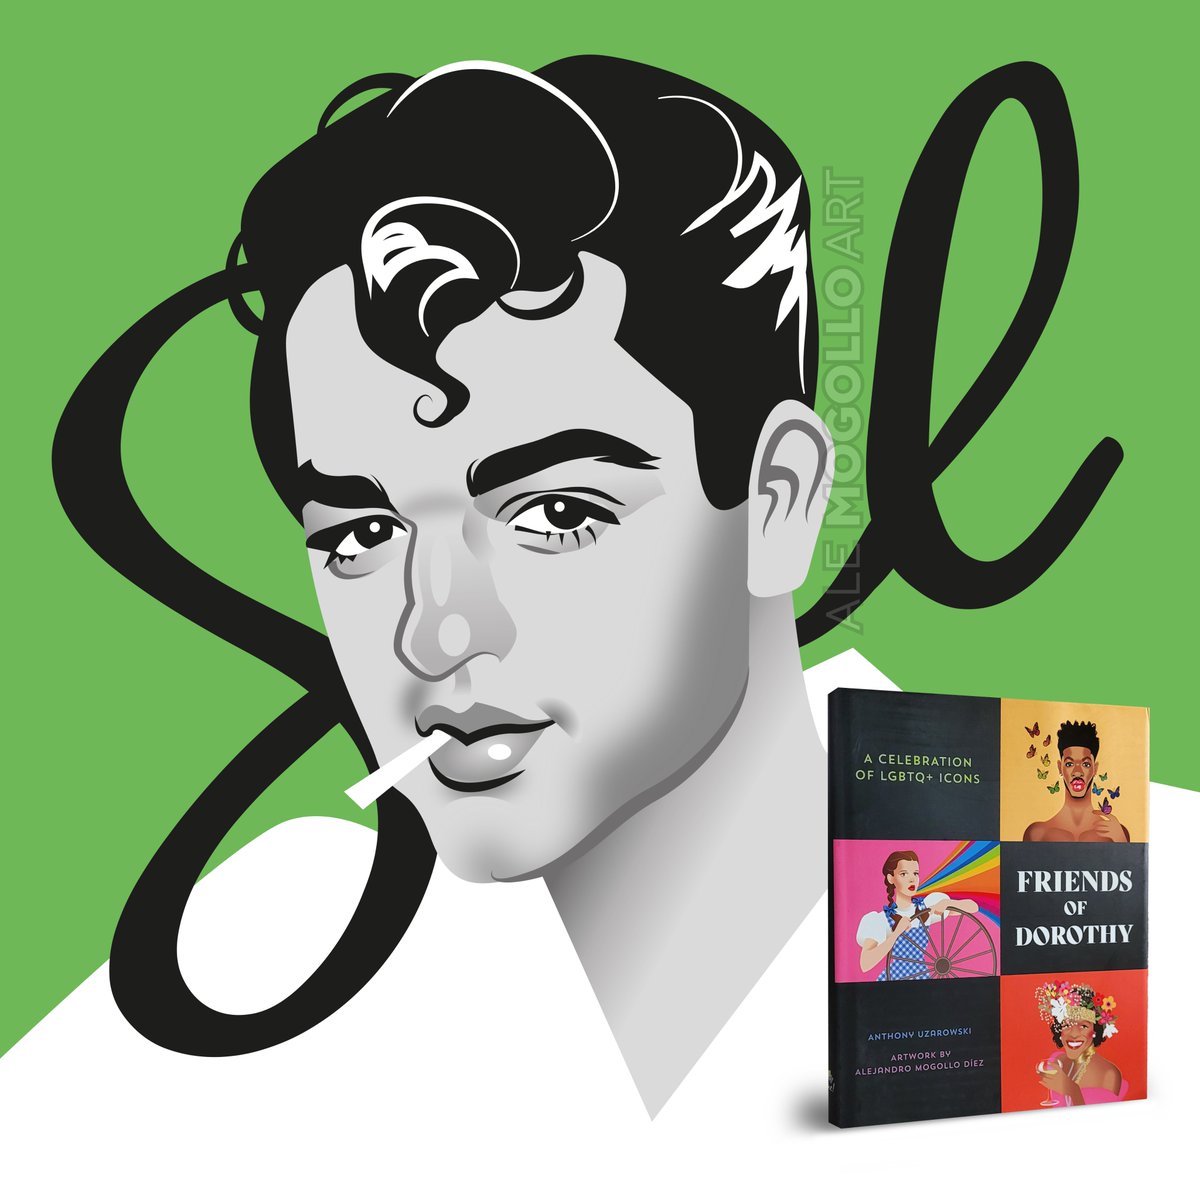 Remembering the iconic Sal Mineo on his 85 birthday anniversary. My artwork is included in the book “Friends of Dorothy, a celebration of LGBTQ+ icons' by Anthony Uzarowski and yours truly, that you can find at Amazon.
#salmineo #friendsofdorothy #gayicons #alejandromogolloart